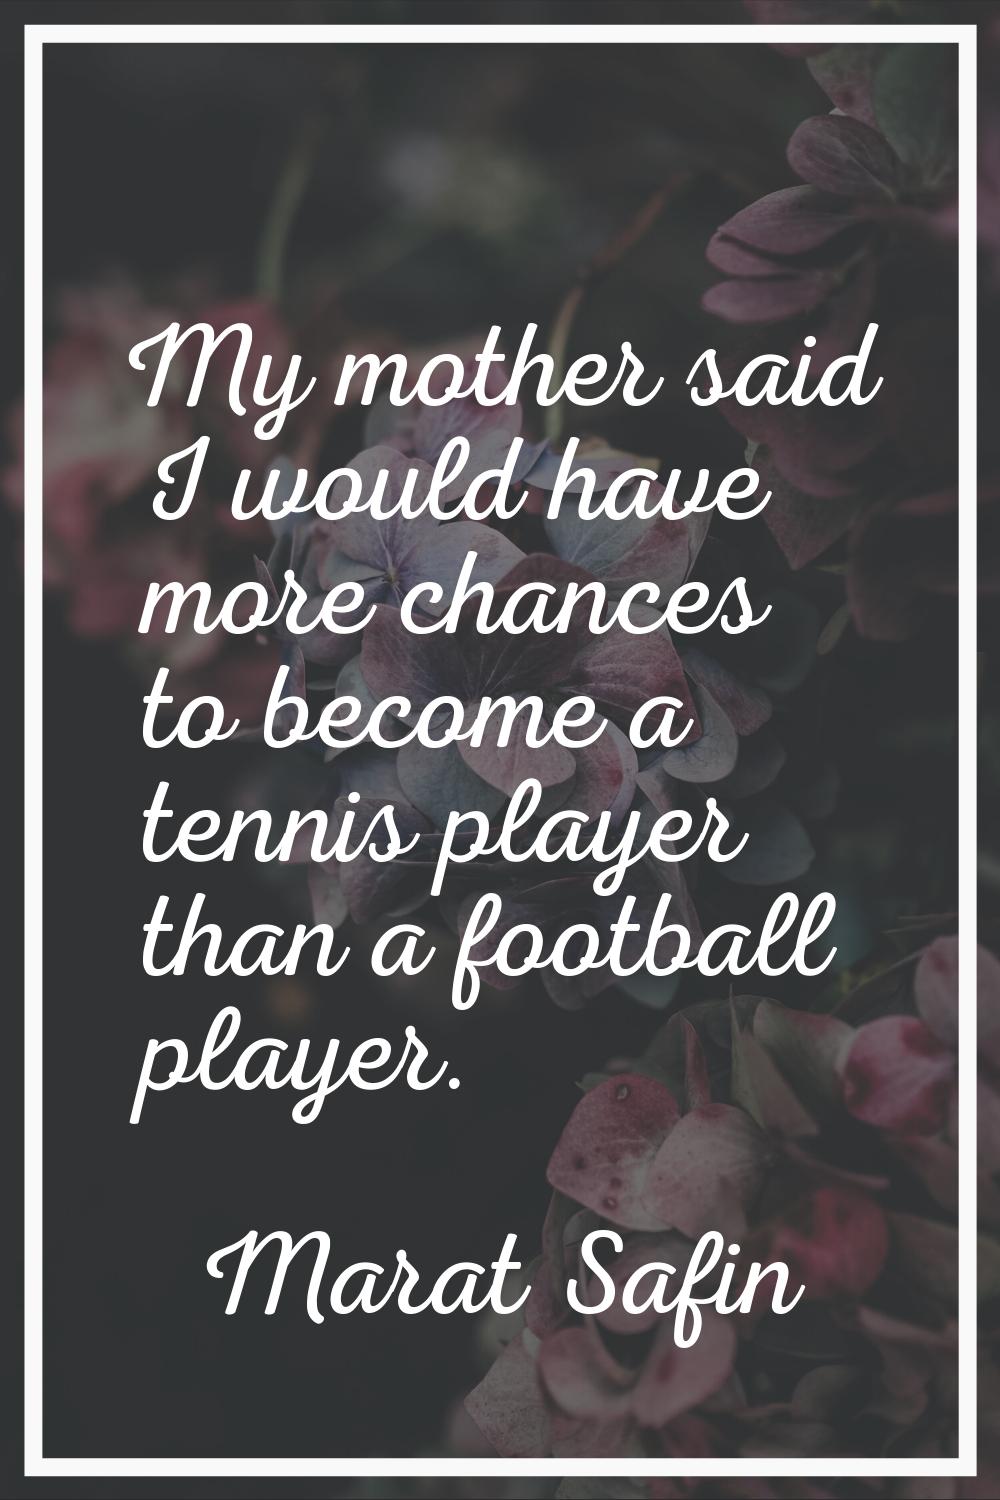 My mother said I would have more chances to become a tennis player than a football player.